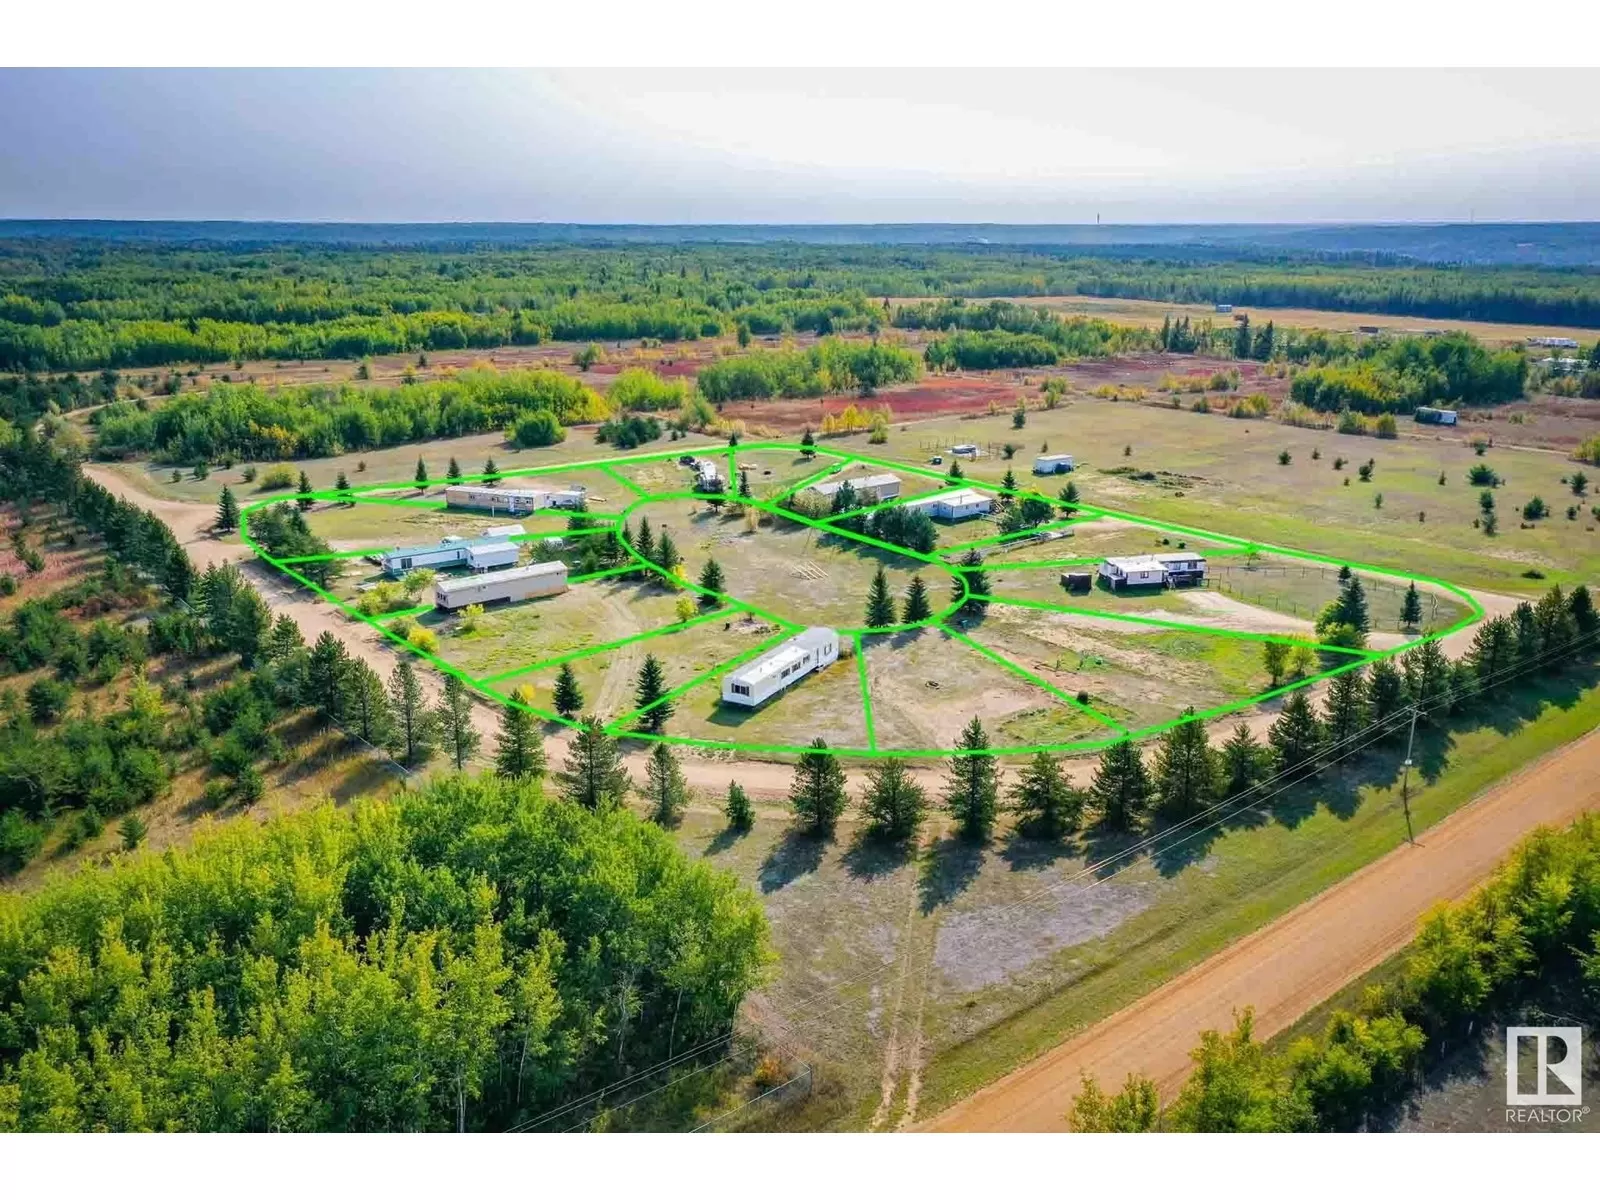 No Building for rent: Unit 13 Pine Meadow, Rural Athabasca County, Alberta T9S 2A8